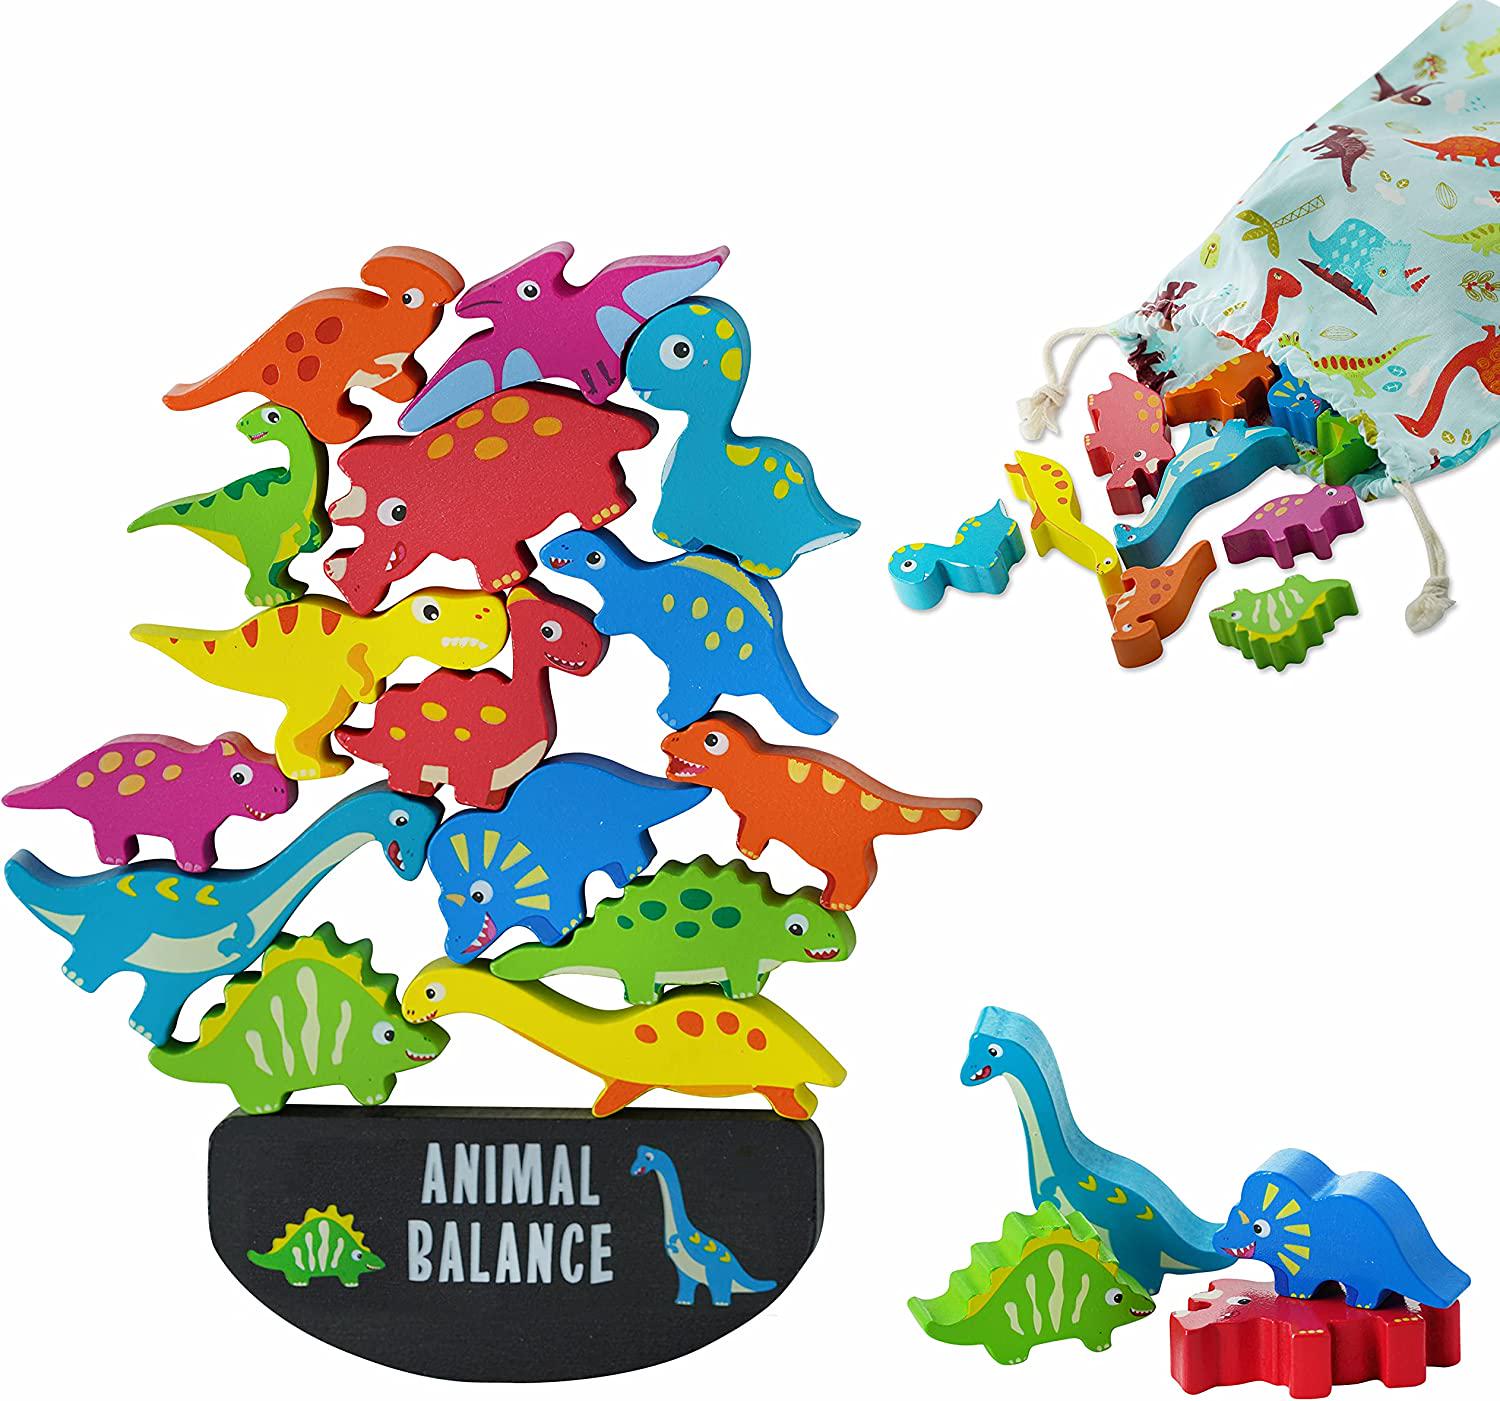 YOUJARL, Kids Toy Dinosaur Stacking Toy for 3+ Yrs Kids [15 Pieces] Montessori Toys for Learning and Balance Training, Wooden Game as Christmas and Birthday Gifts for 3 4 5 6+ Yrs Old [Sturdy and Waterproof]